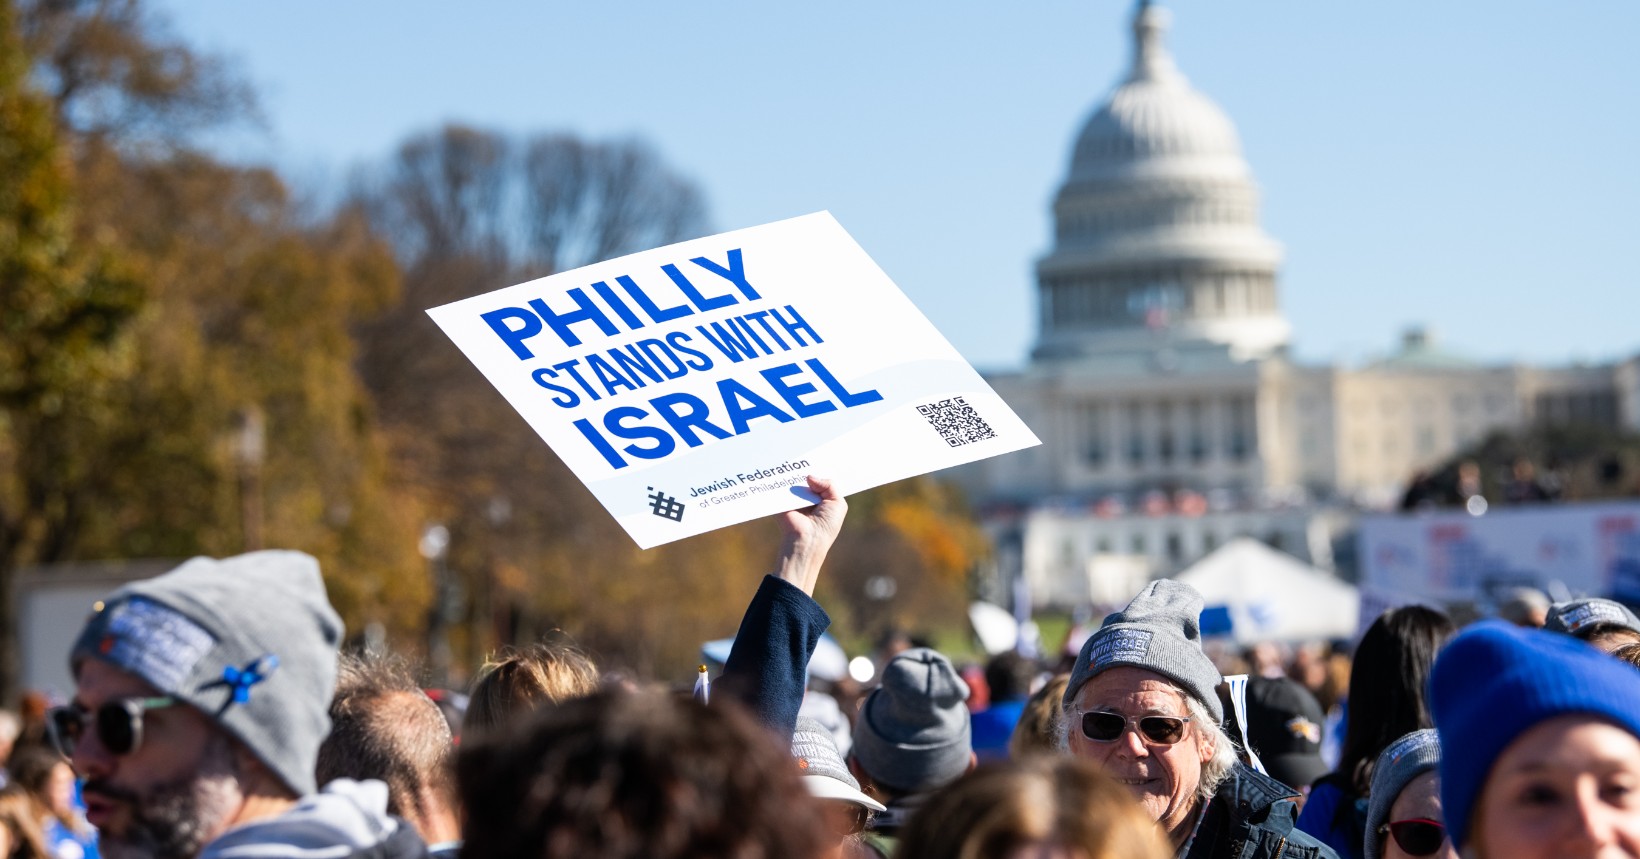 March for Israel: Largest Jewish Gathering in US History